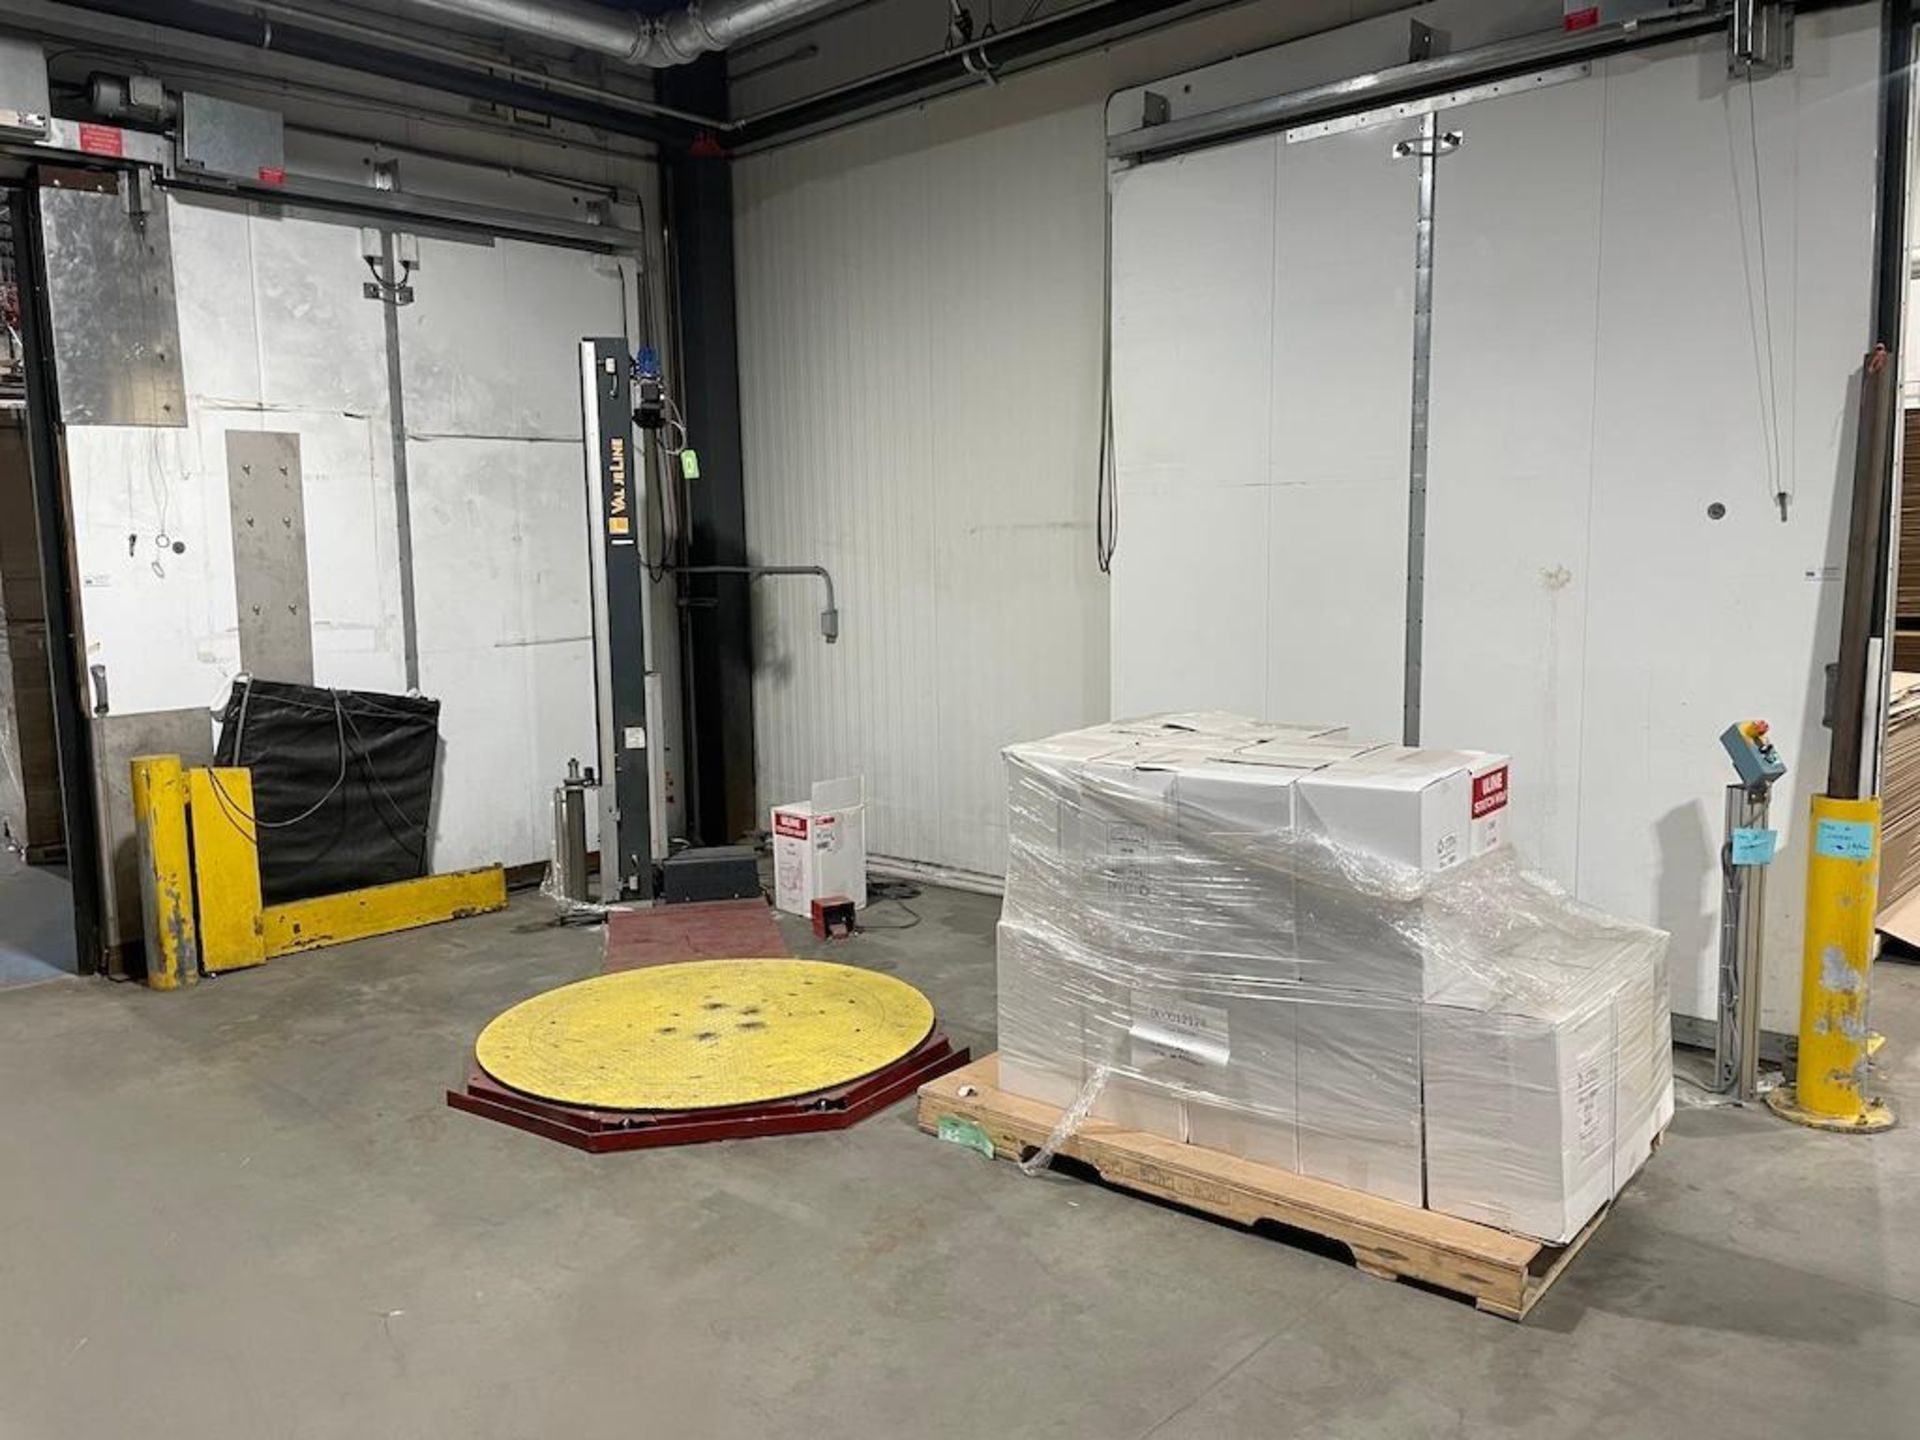 WULFTEC PALLET WRAPPER MODEL WVL-75, SN 68003-1-0610, W PALLET OF ULINE STRETCH WRAP [TROIS RIVIERES